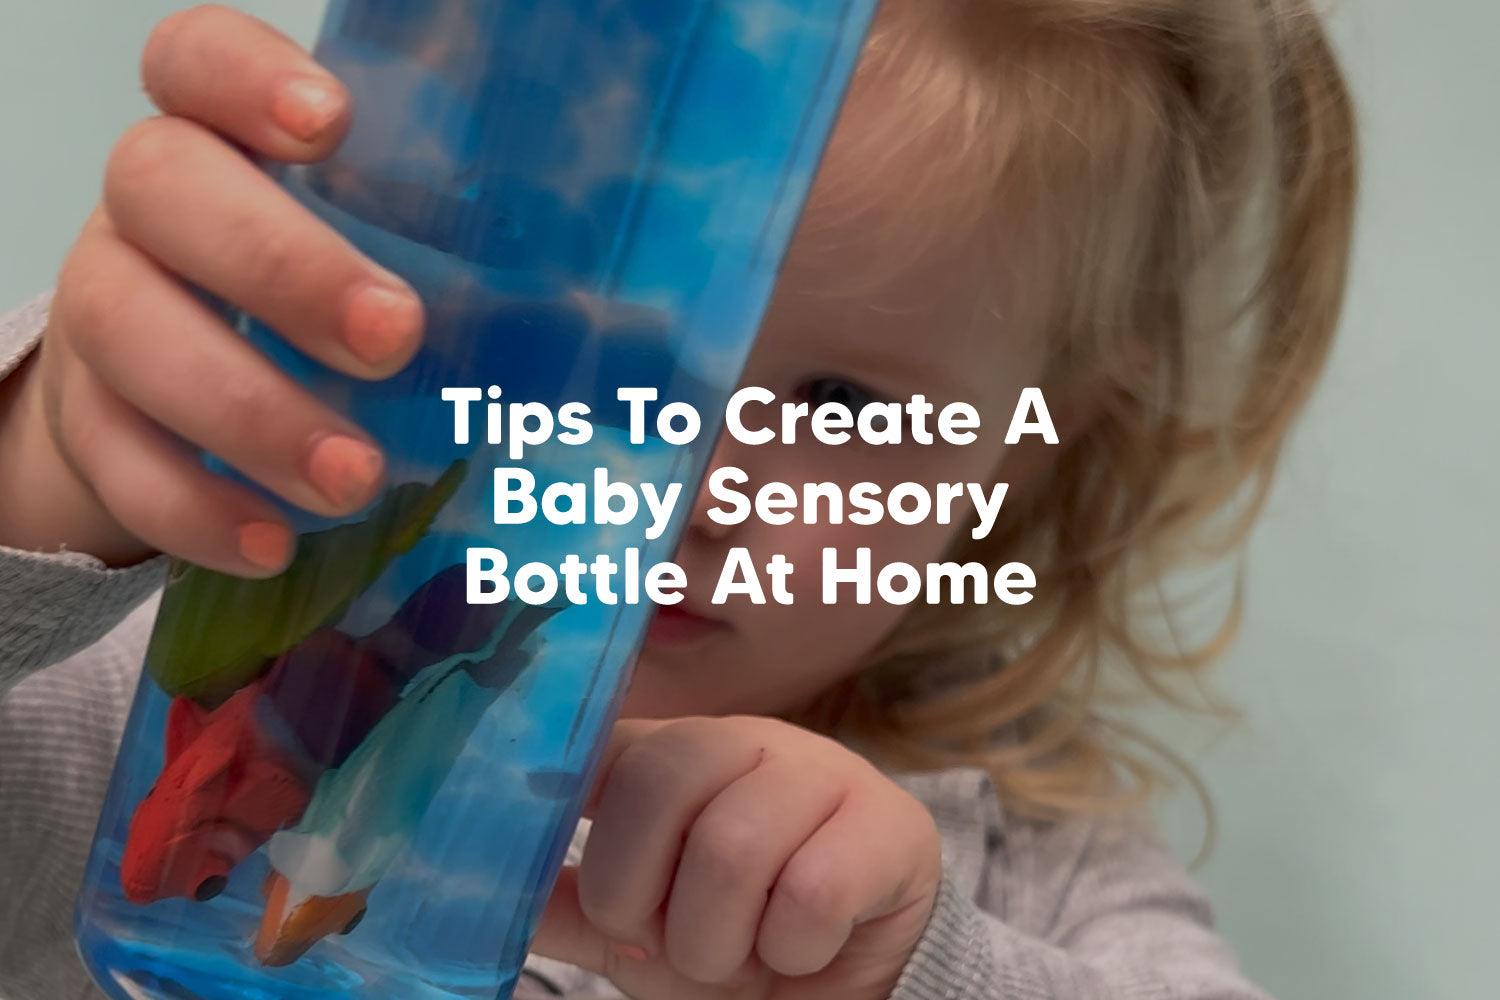 Tips To Create Baby Sensory Bottles At Home